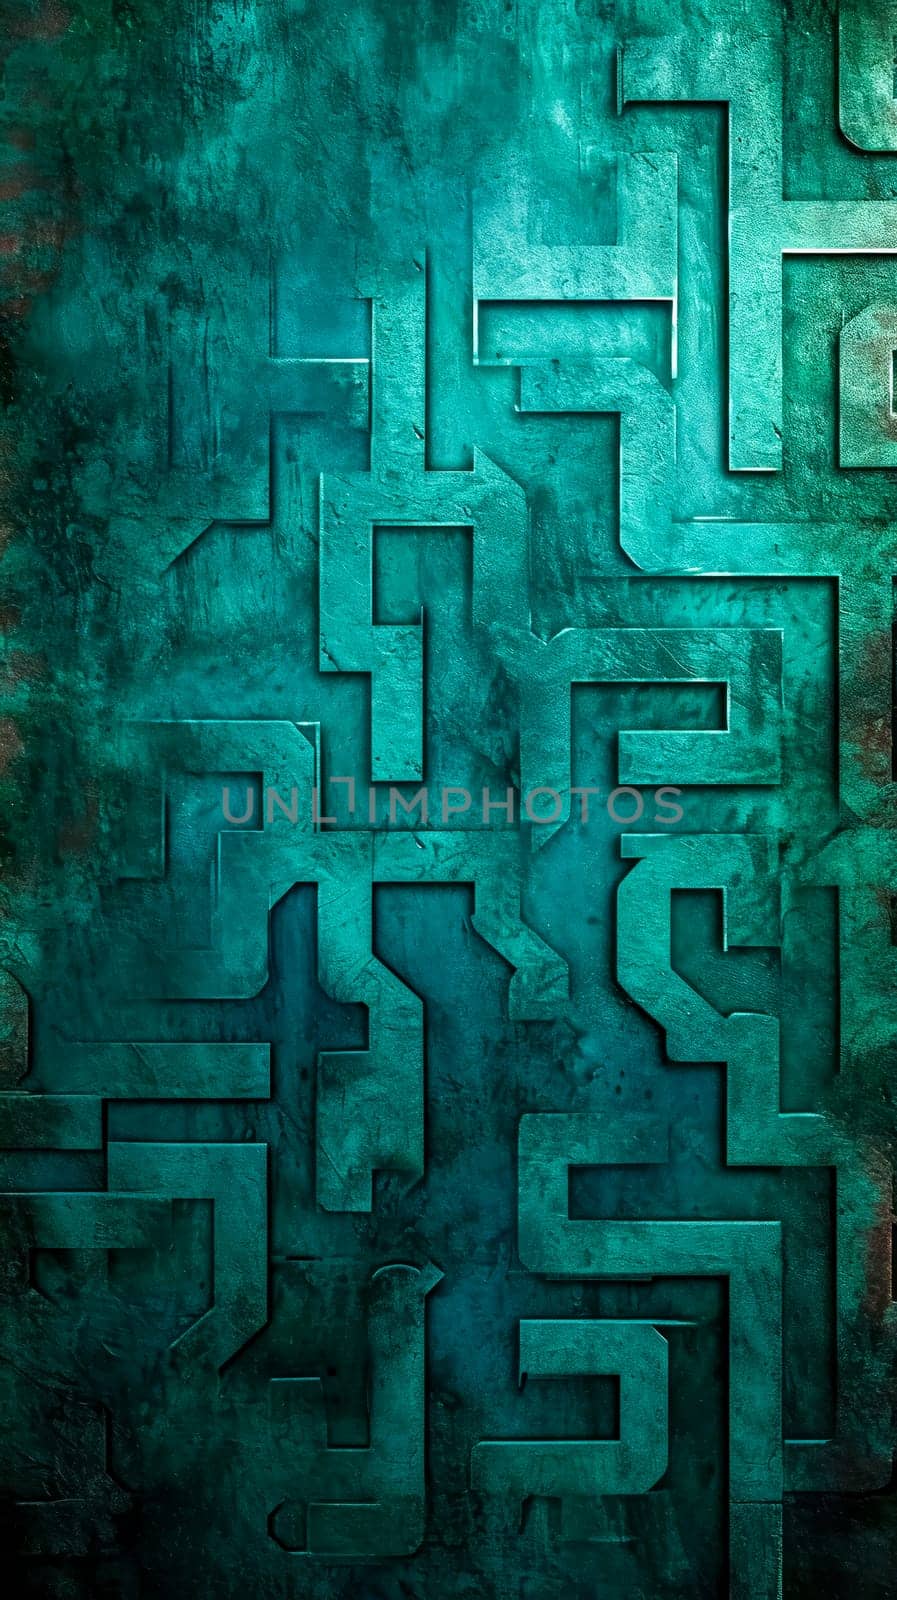 A complex maze design carved into a textured, teal-colored wall, creating a mysterious and thought-provoking background with a strong sense of challenge and intrigue by Edophoto